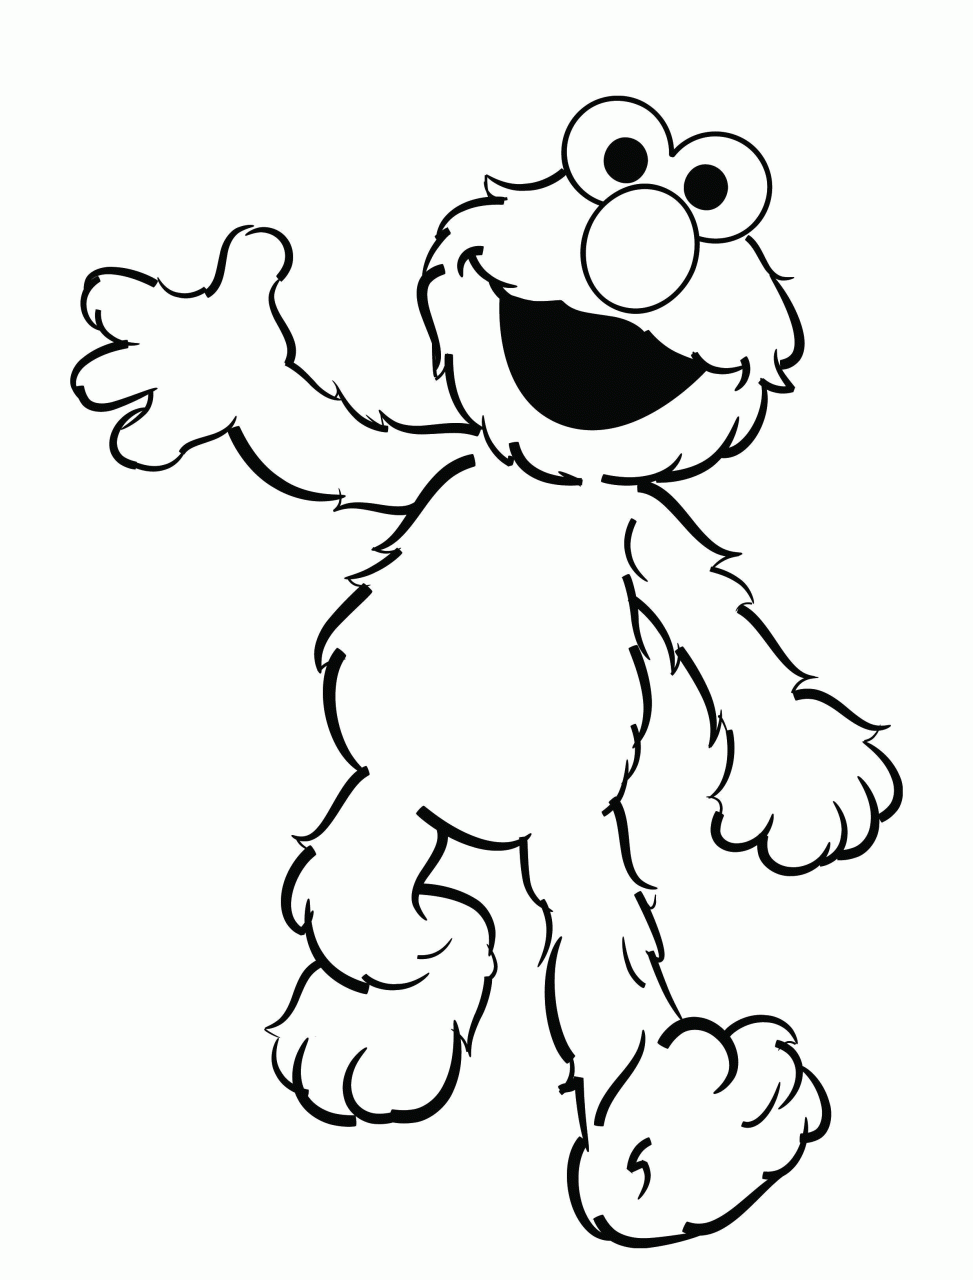 Sesame Street Coloring Page For Free Sesame Street Zoe Coloring